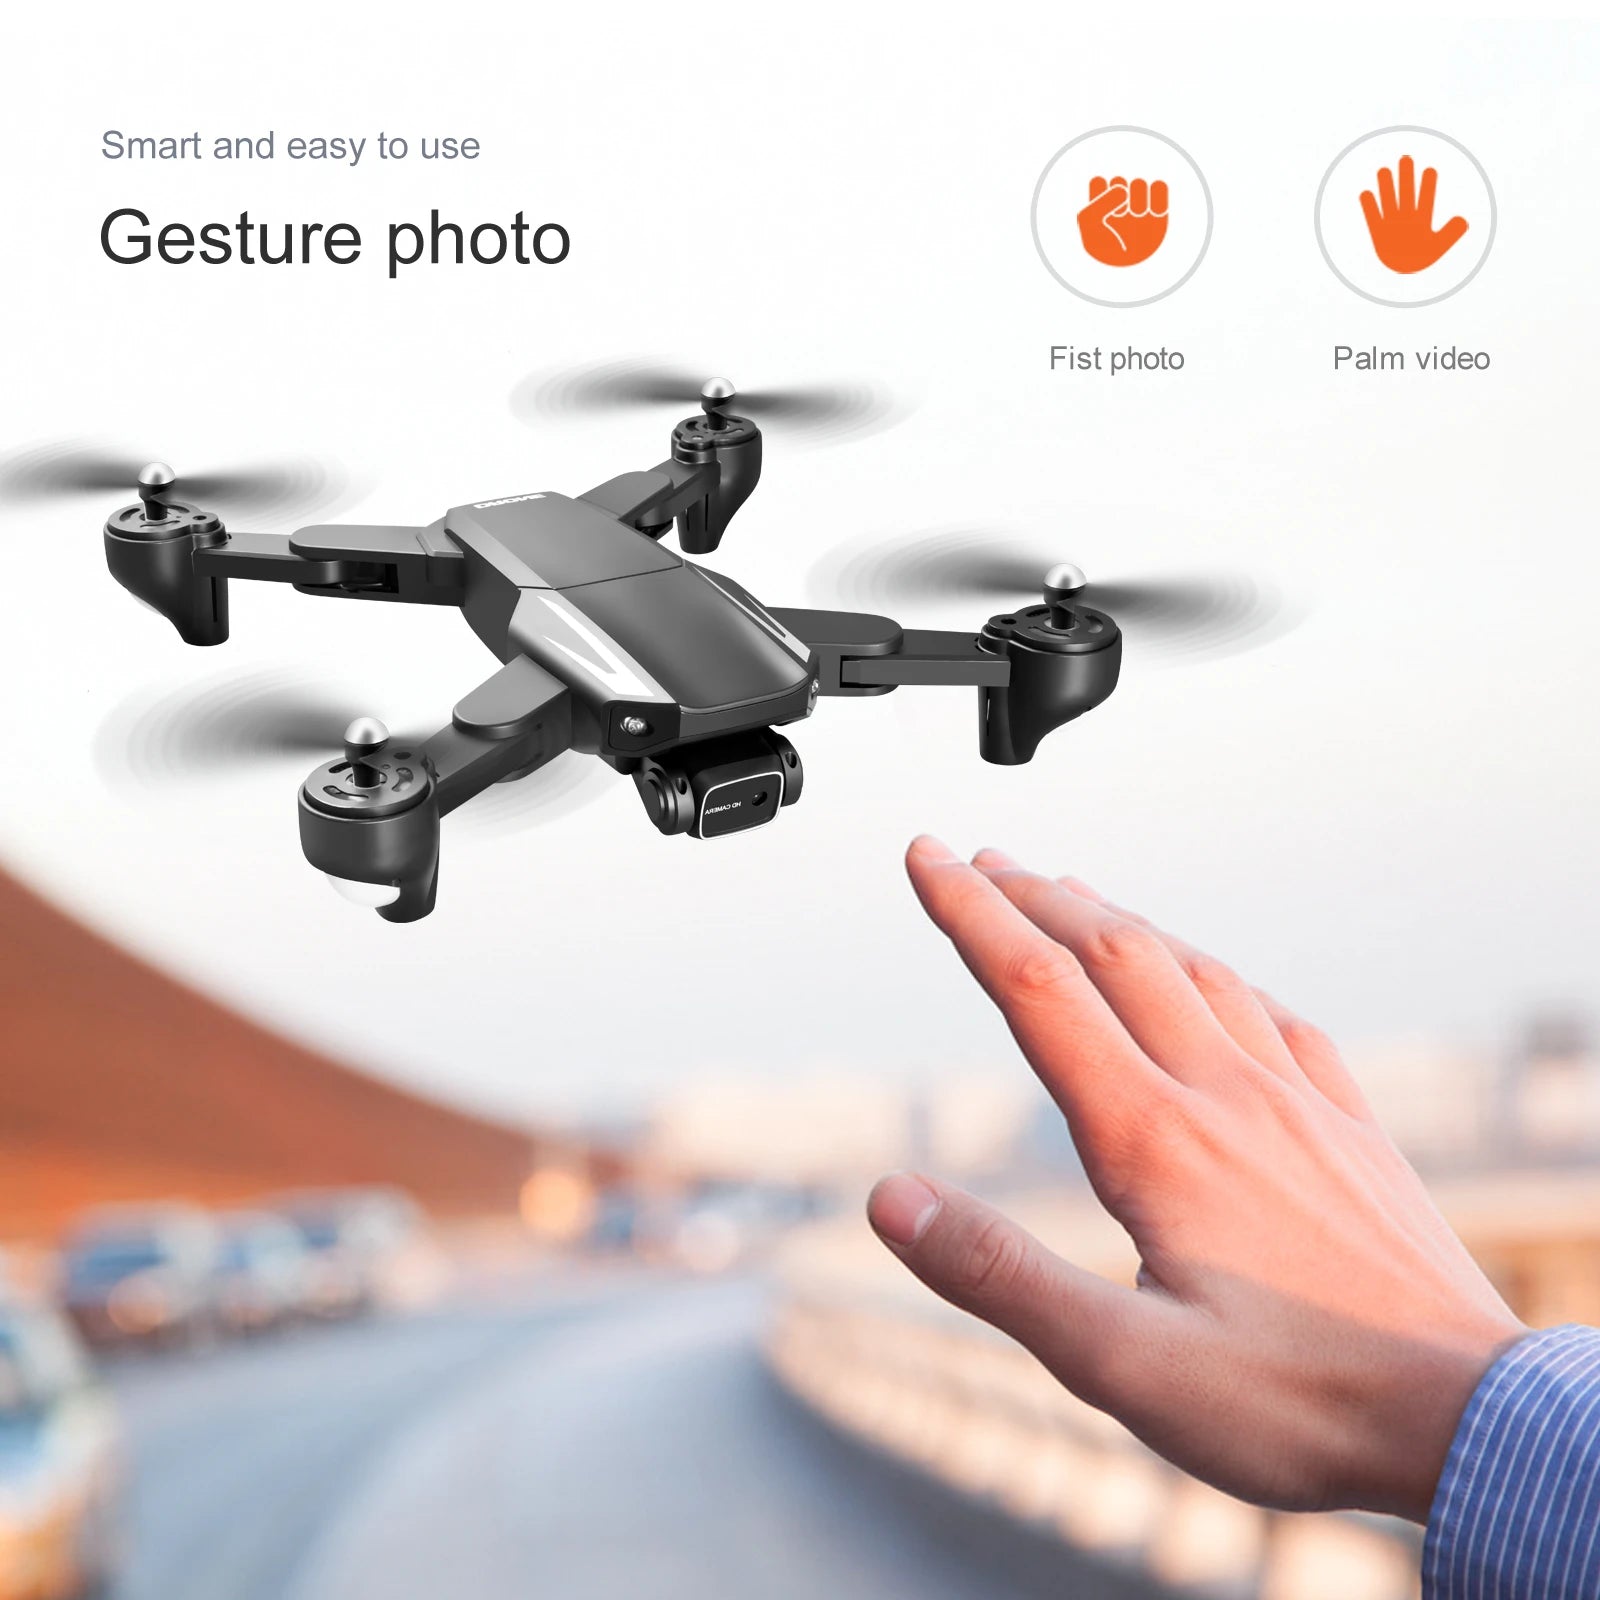 S93 Drone, smart and easy to use gesture photo fist photo palm